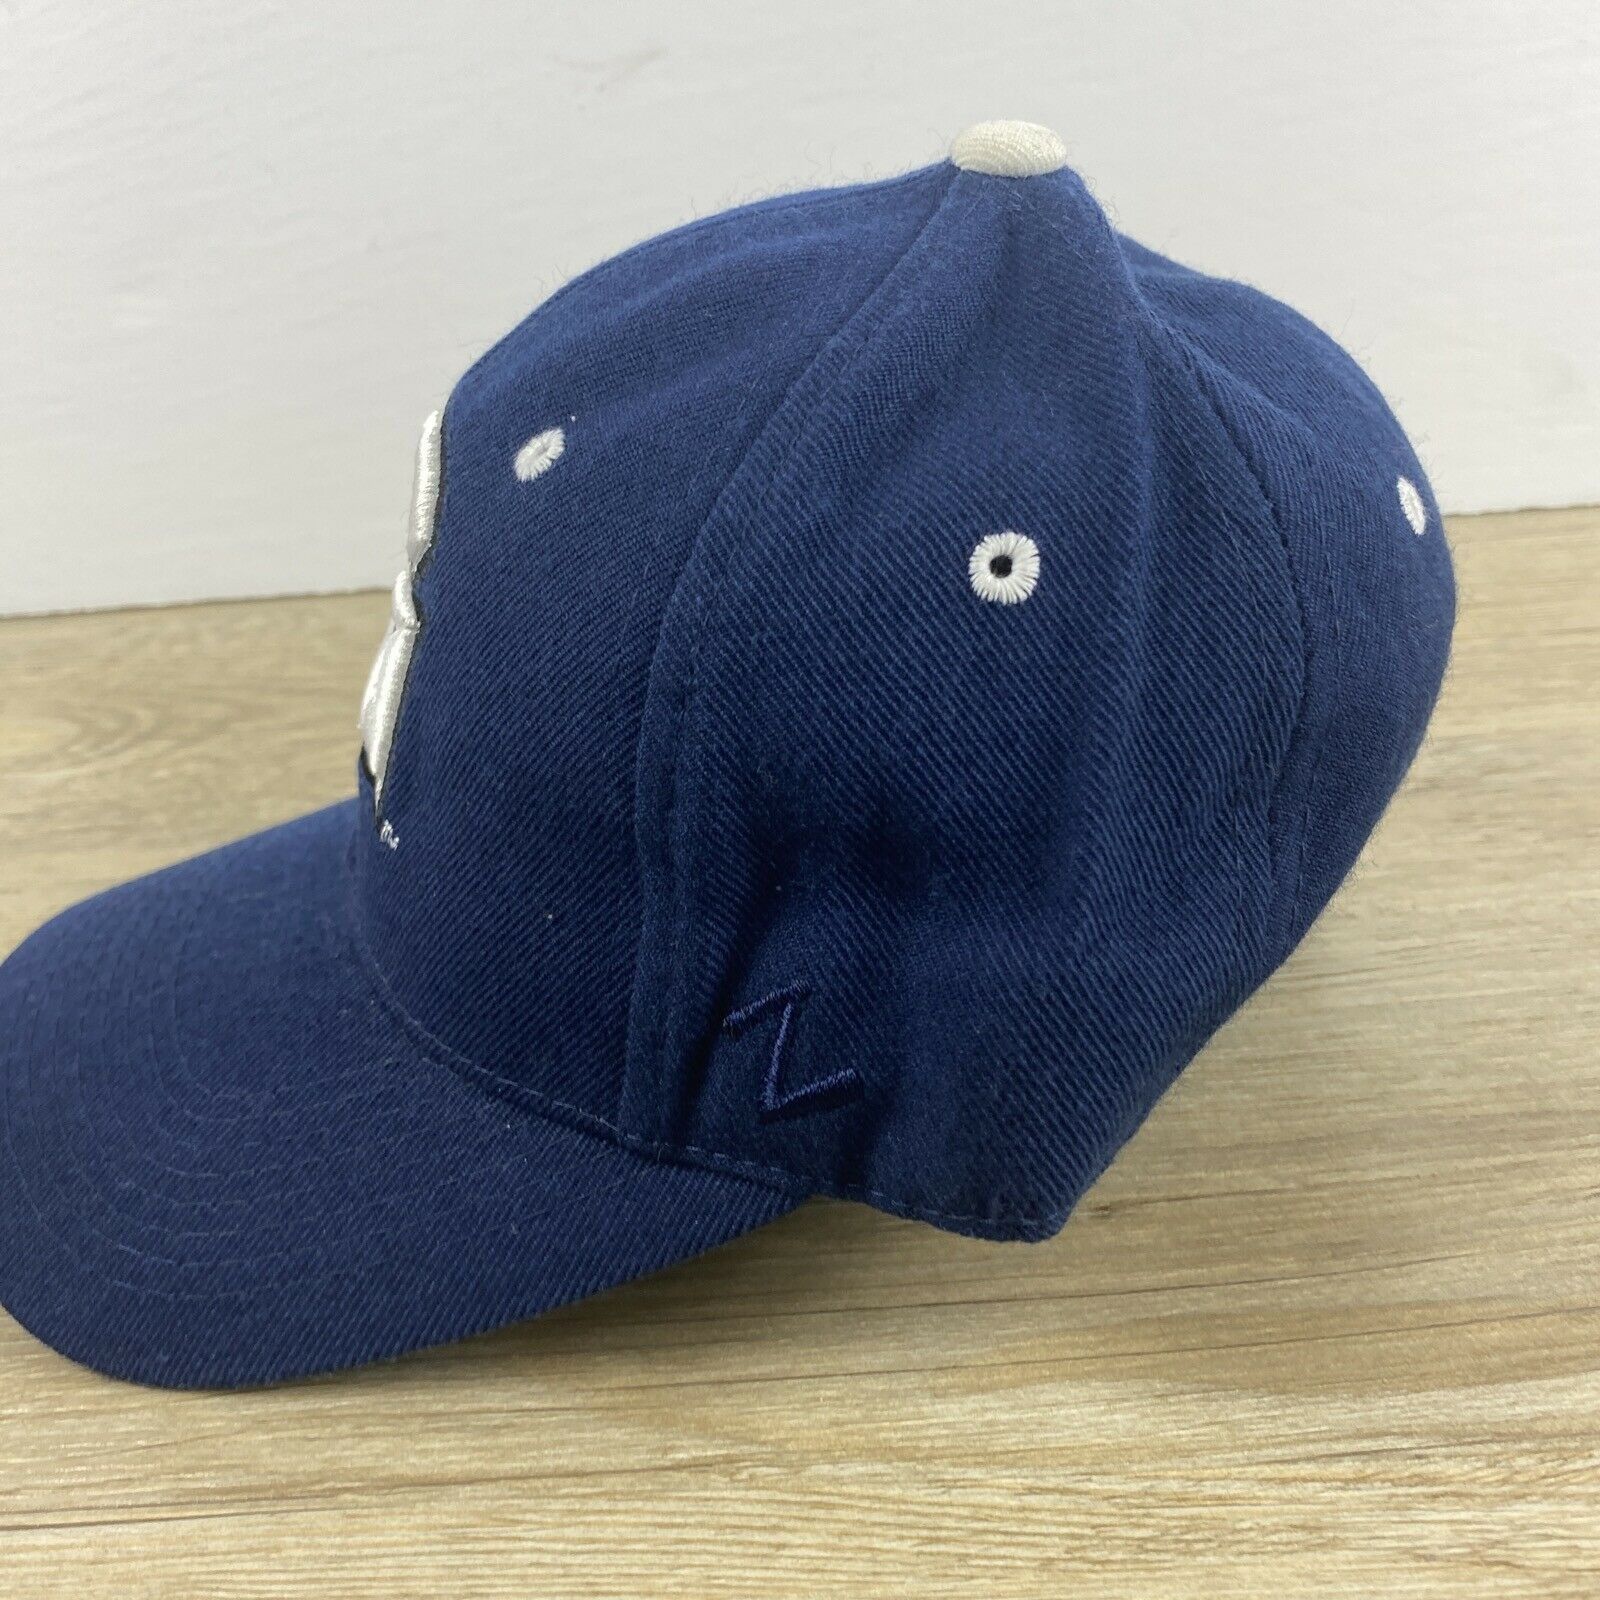 Zephyr Georgetown Hoyas Hat Navy NCAA Size 6 3/4 Fitted Hat Size ONE SIZE - 3 Thumbnail